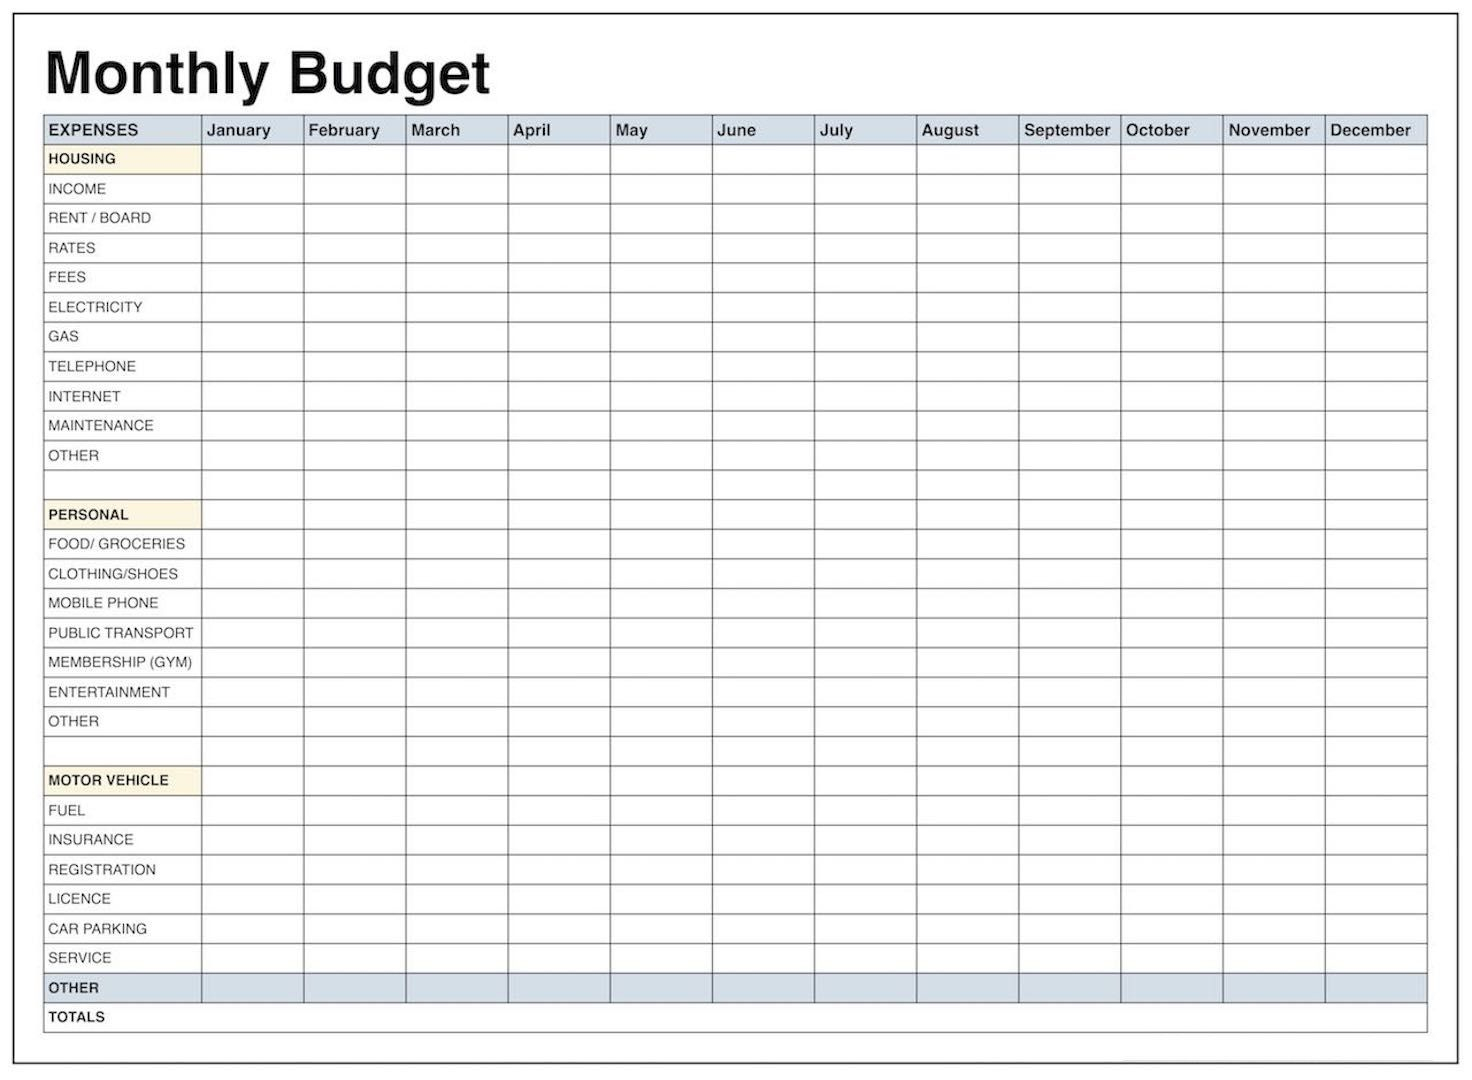 Monthly Budget Spreadsheet Best Free Dave Ramsey Excel Download - Free Printable Monthly Budget Worksheets